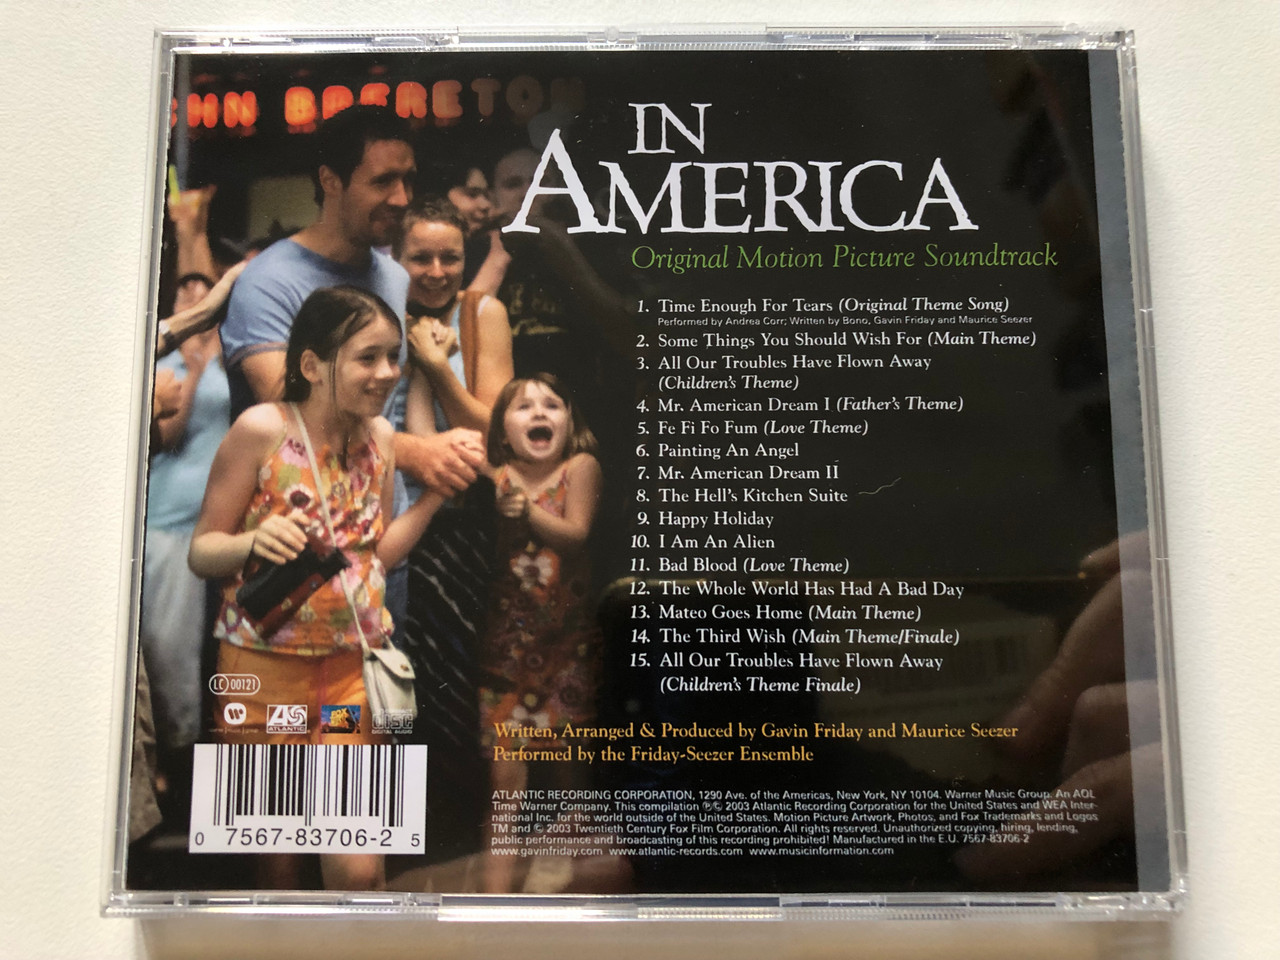 https://cdn10.bigcommerce.com/s-62bdpkt7pb/products/0/images/312773/In_America_Original_Motion_Picture_Soundtrack_-_Music_by_Gavin_Friday_and_Maurice_Seezer_Atlantic_Audio_CD_2003_7567-83706-2_2__39251.1700144088.1280.1280.JPG?c=2